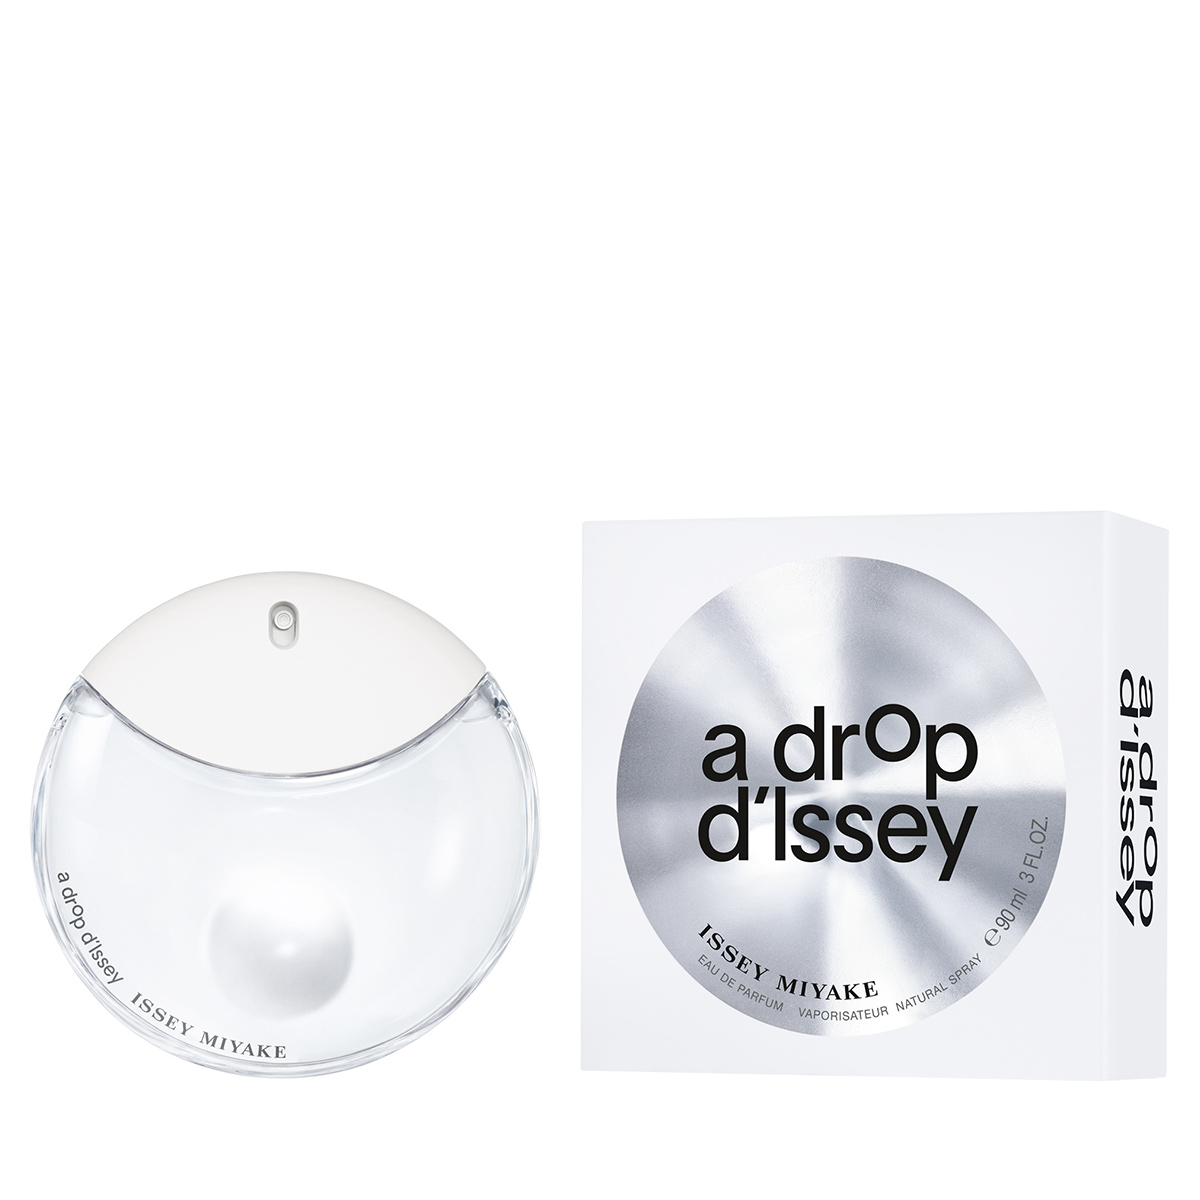 A Drop D'Issey - Issey Miyake - 90 ml - edp